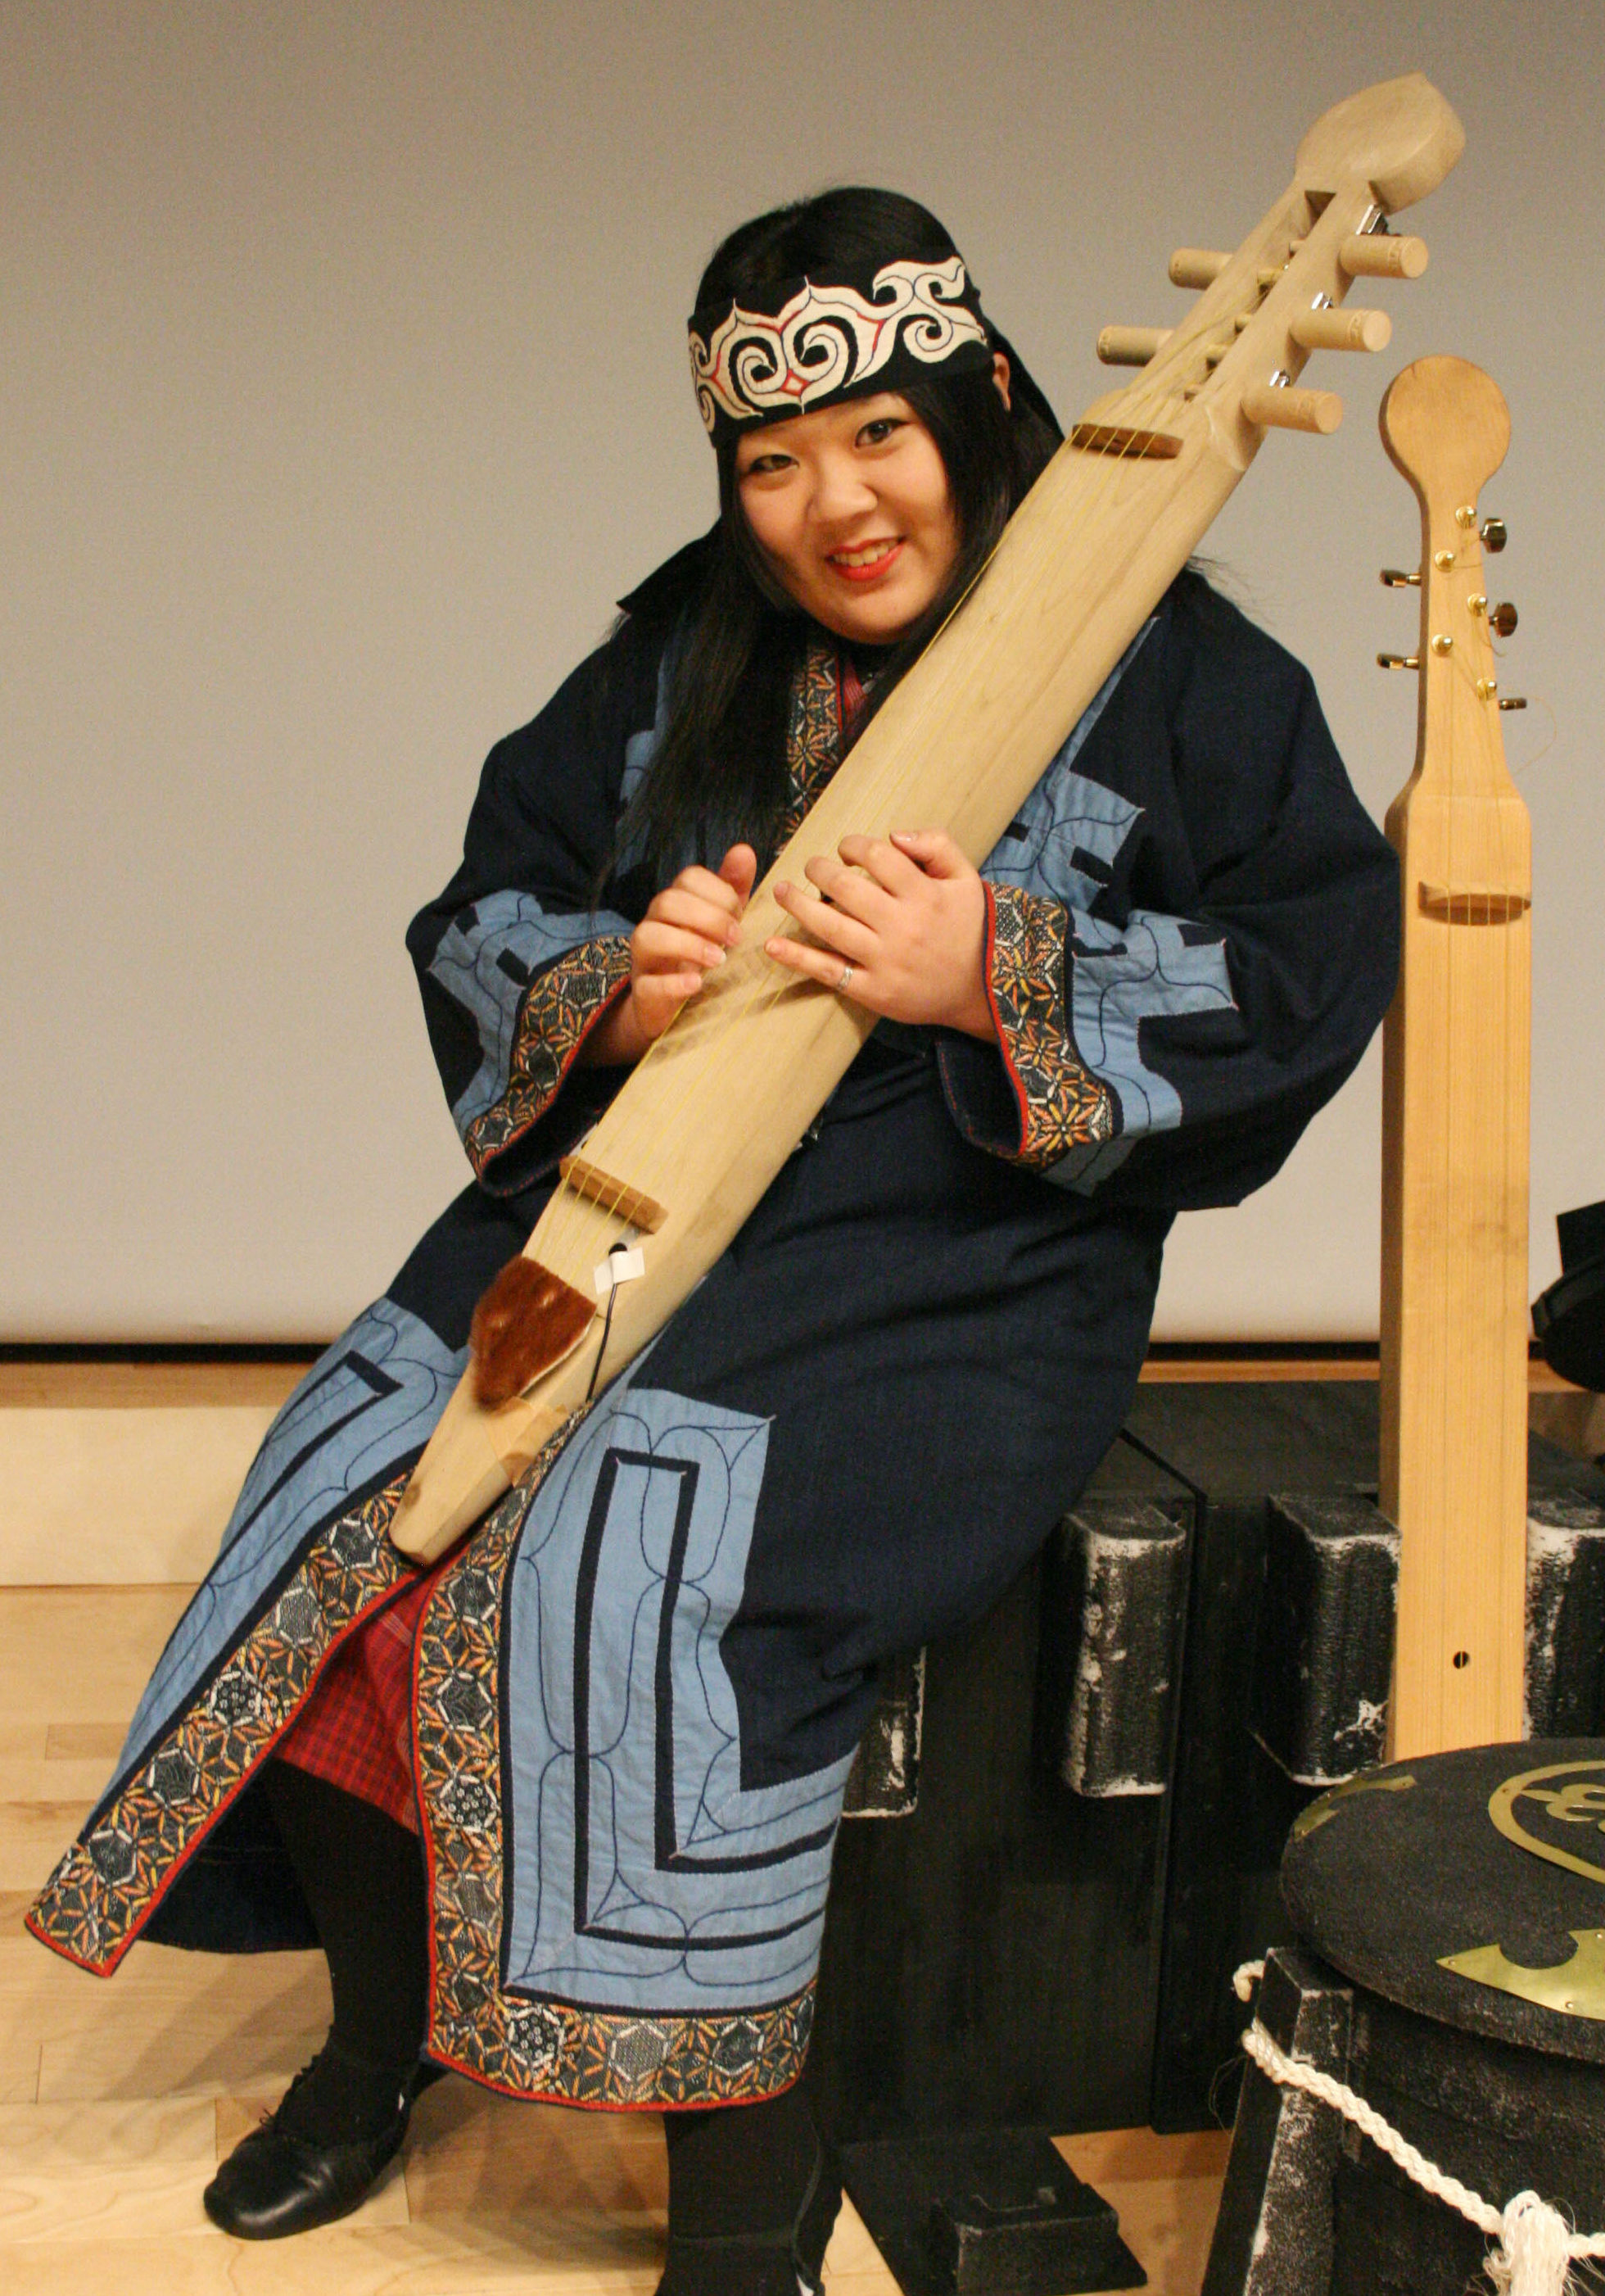 Girl embraces Ainu dance, shivers her timbers | The Japan Times